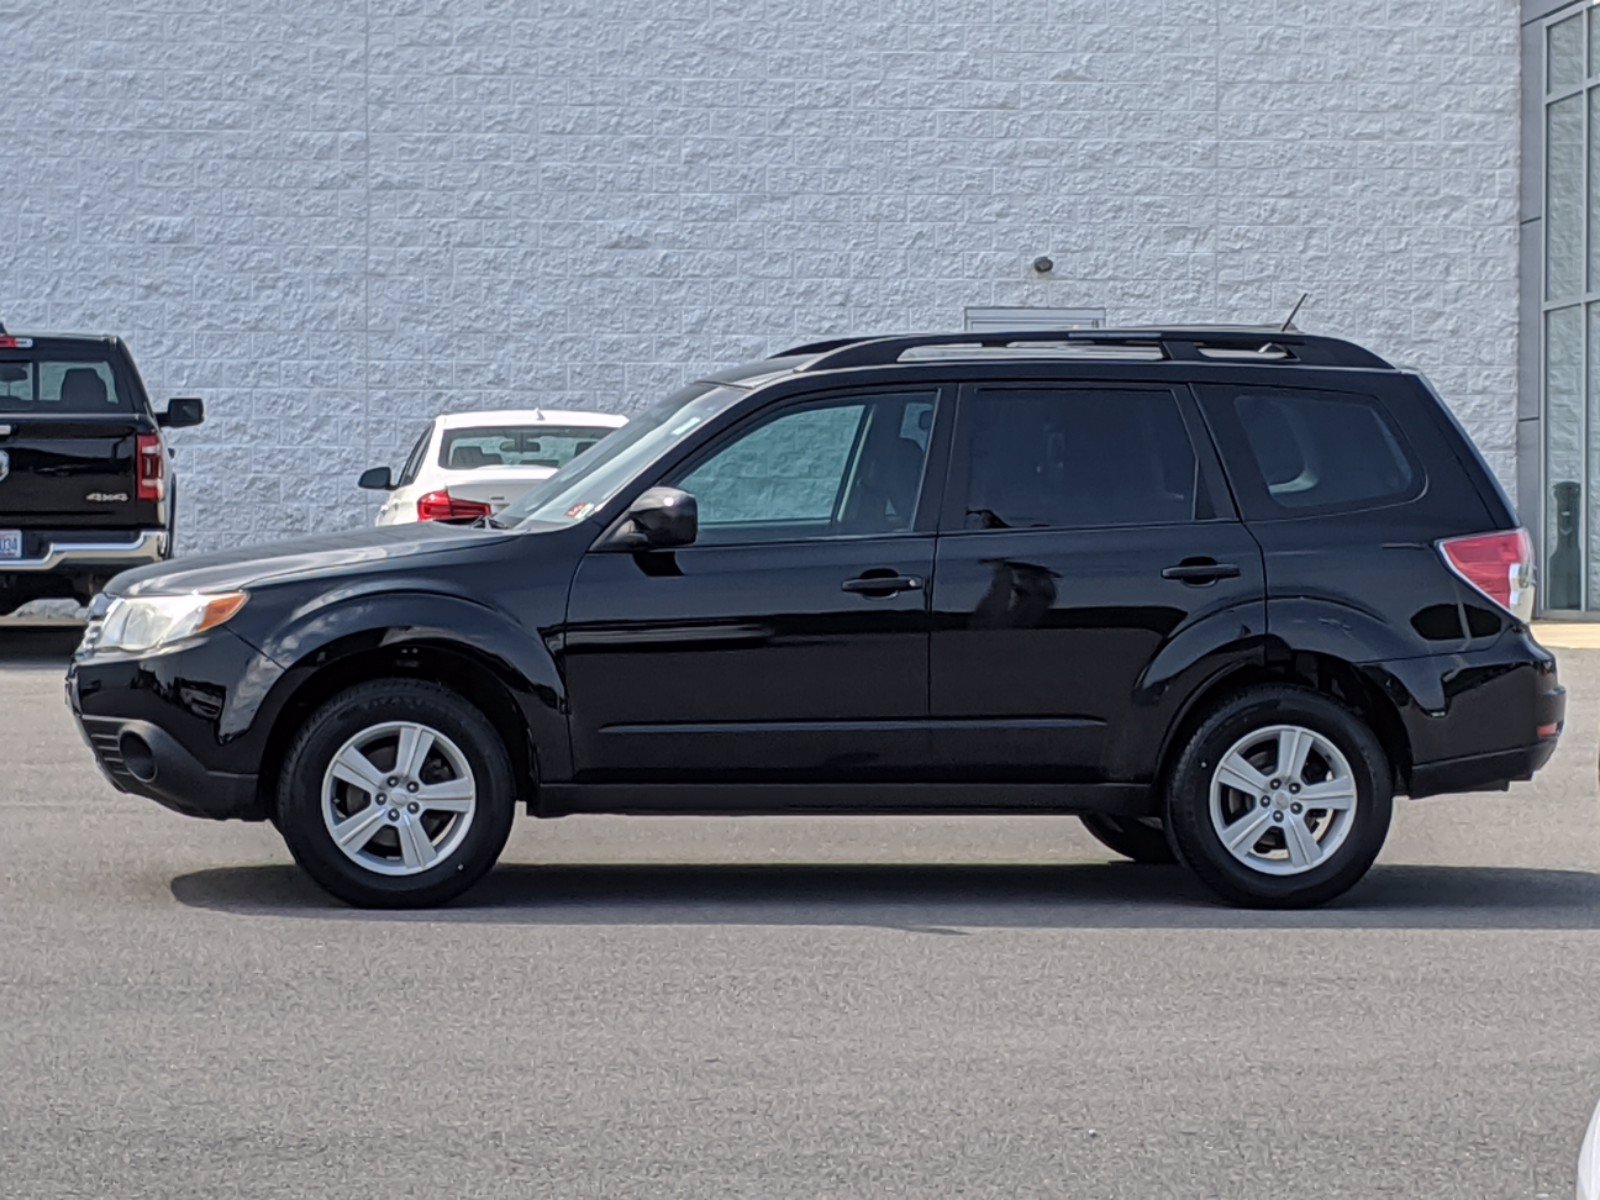 PreOwned 2010 Subaru Forester 2.5X AWD